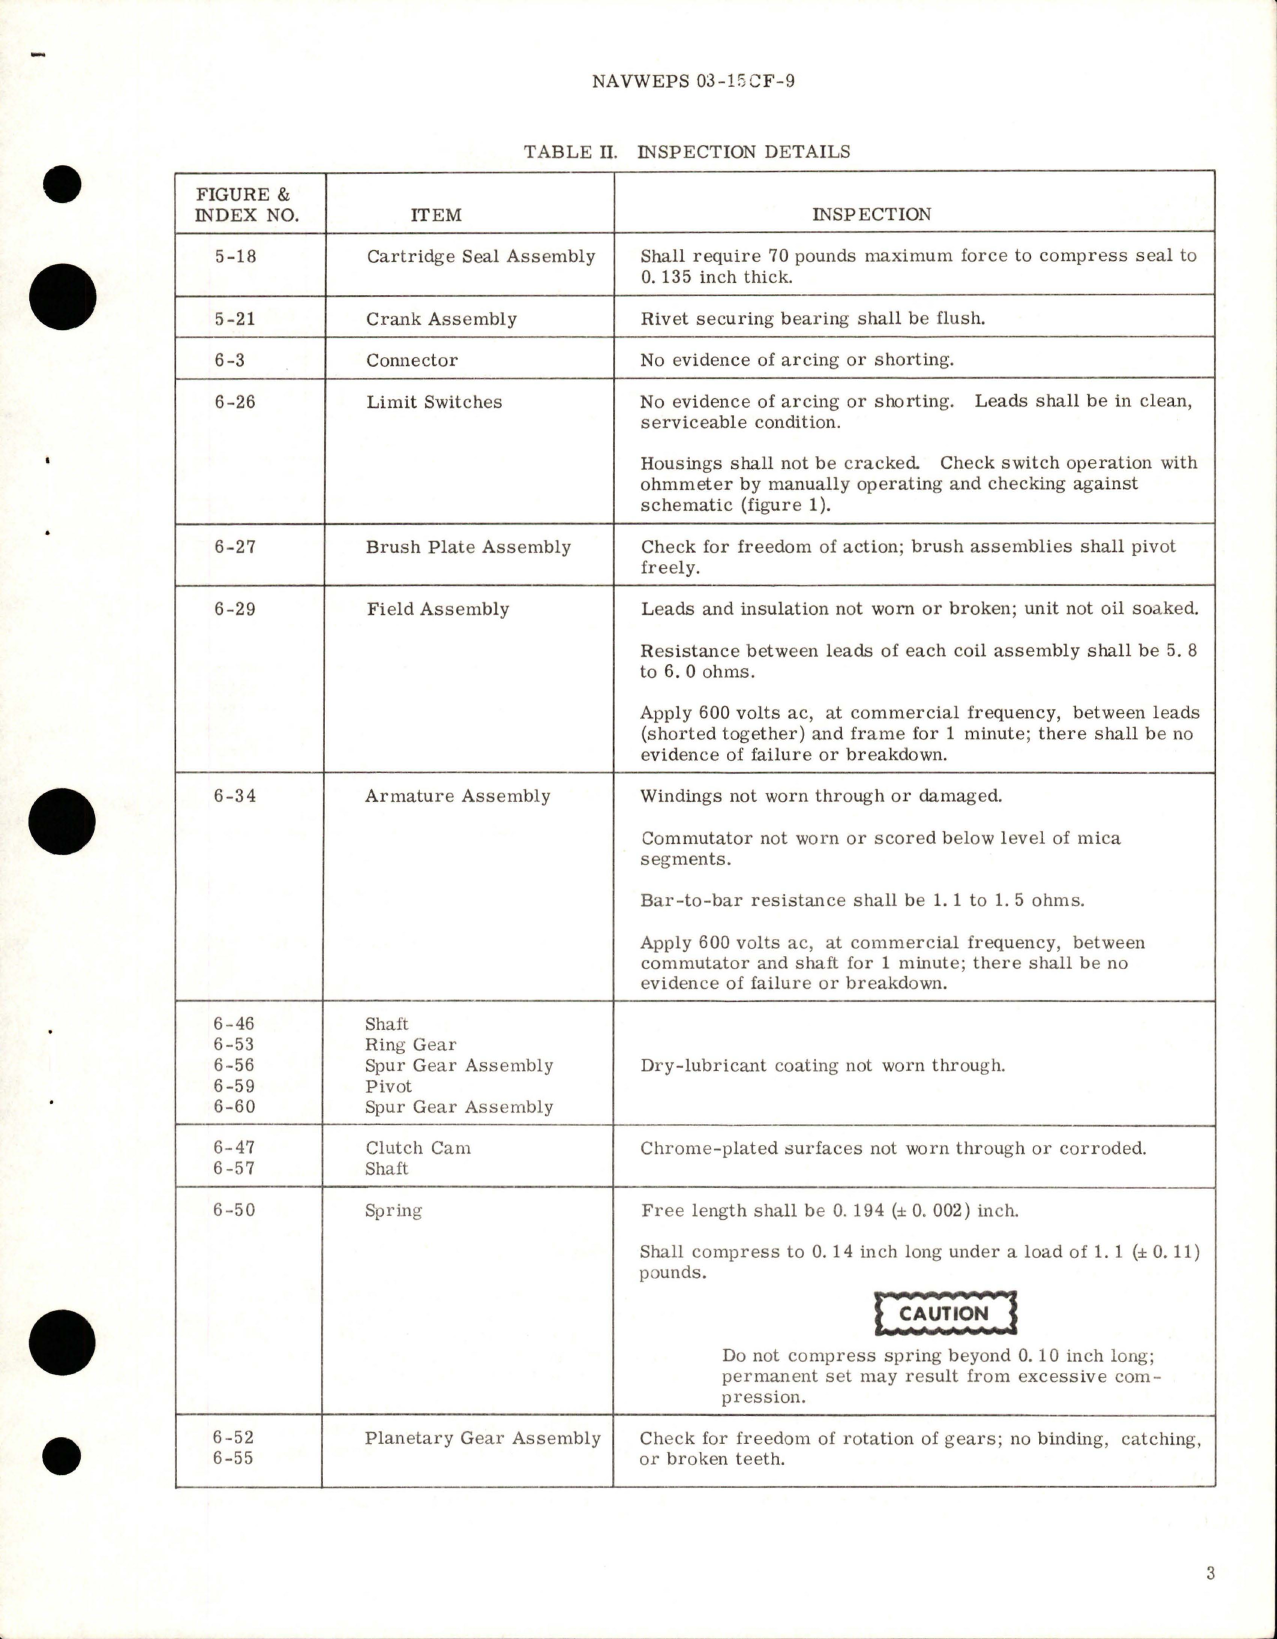 Sample page 5 from AirCorps Library document: Overhaul Instructions with Parts for Motor Actuated Gate Shutoff Valve - Part 126335